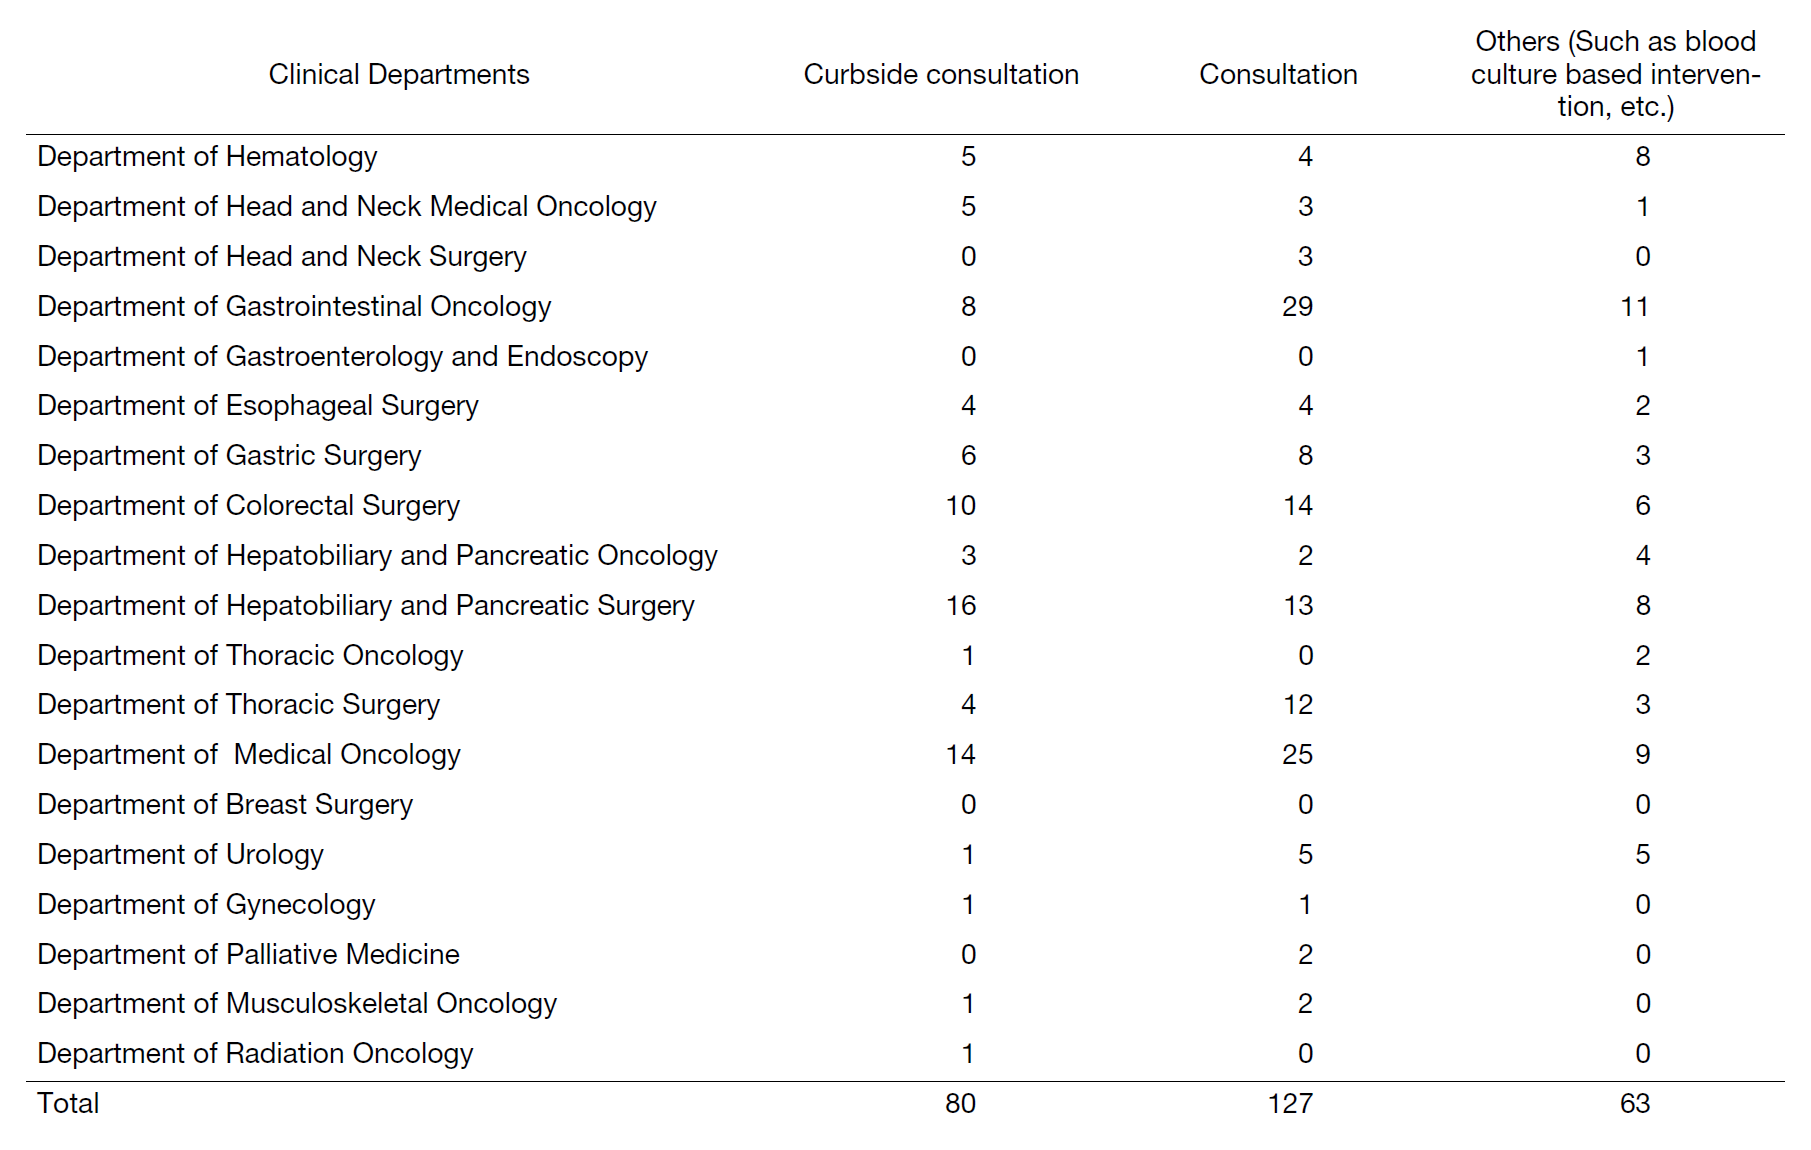 Table 1. Number of infectious diseases consultation